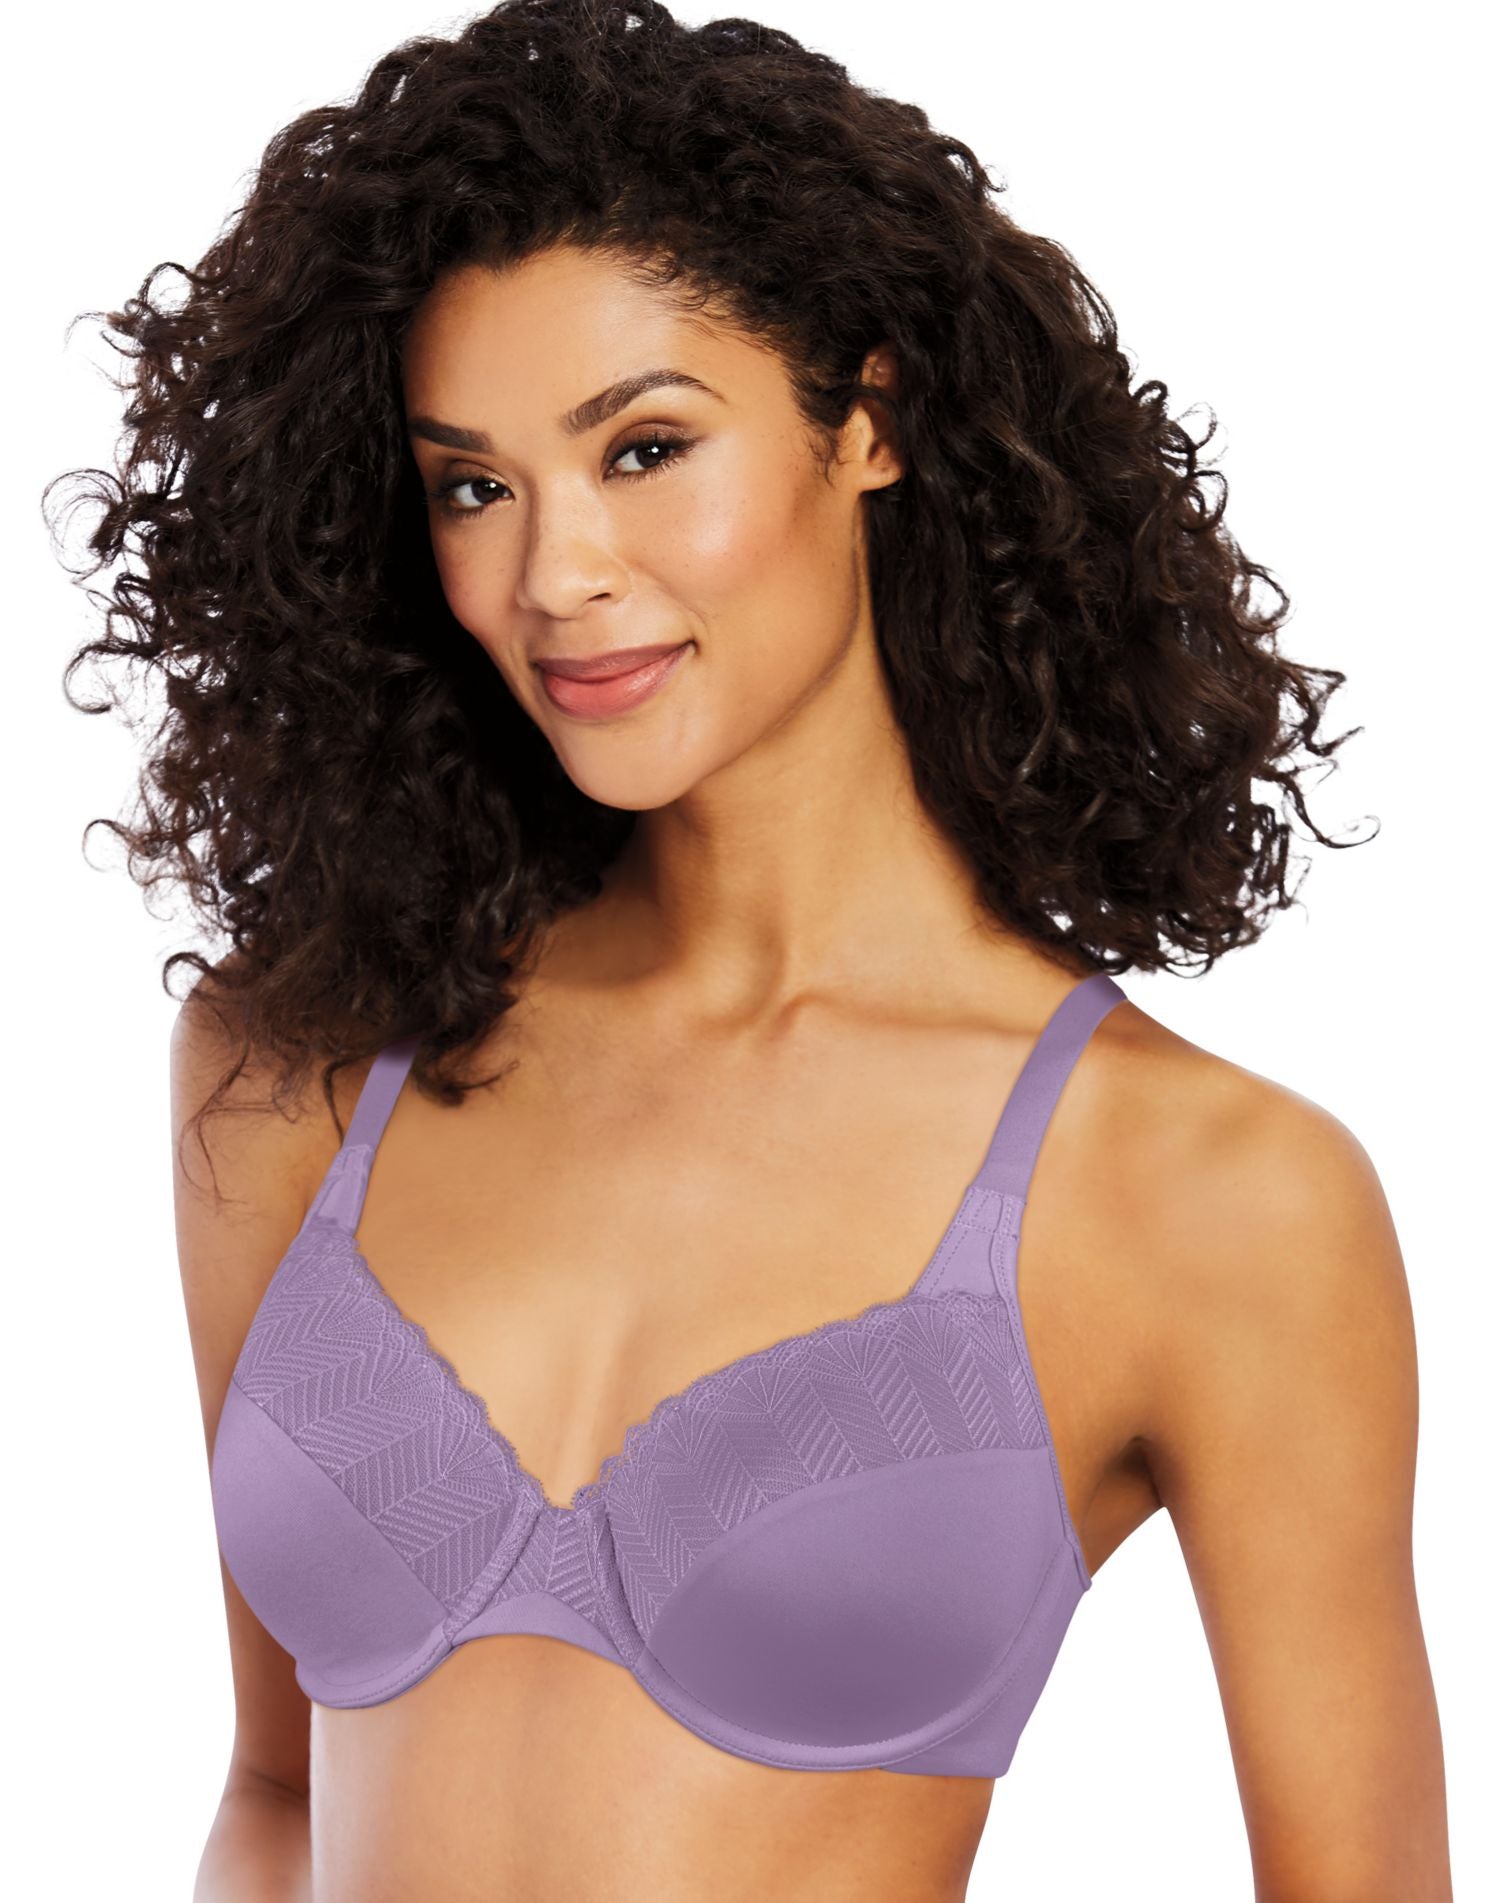 Women's Bali DF0082 Passion for Comfort Back Smoothing Underwire